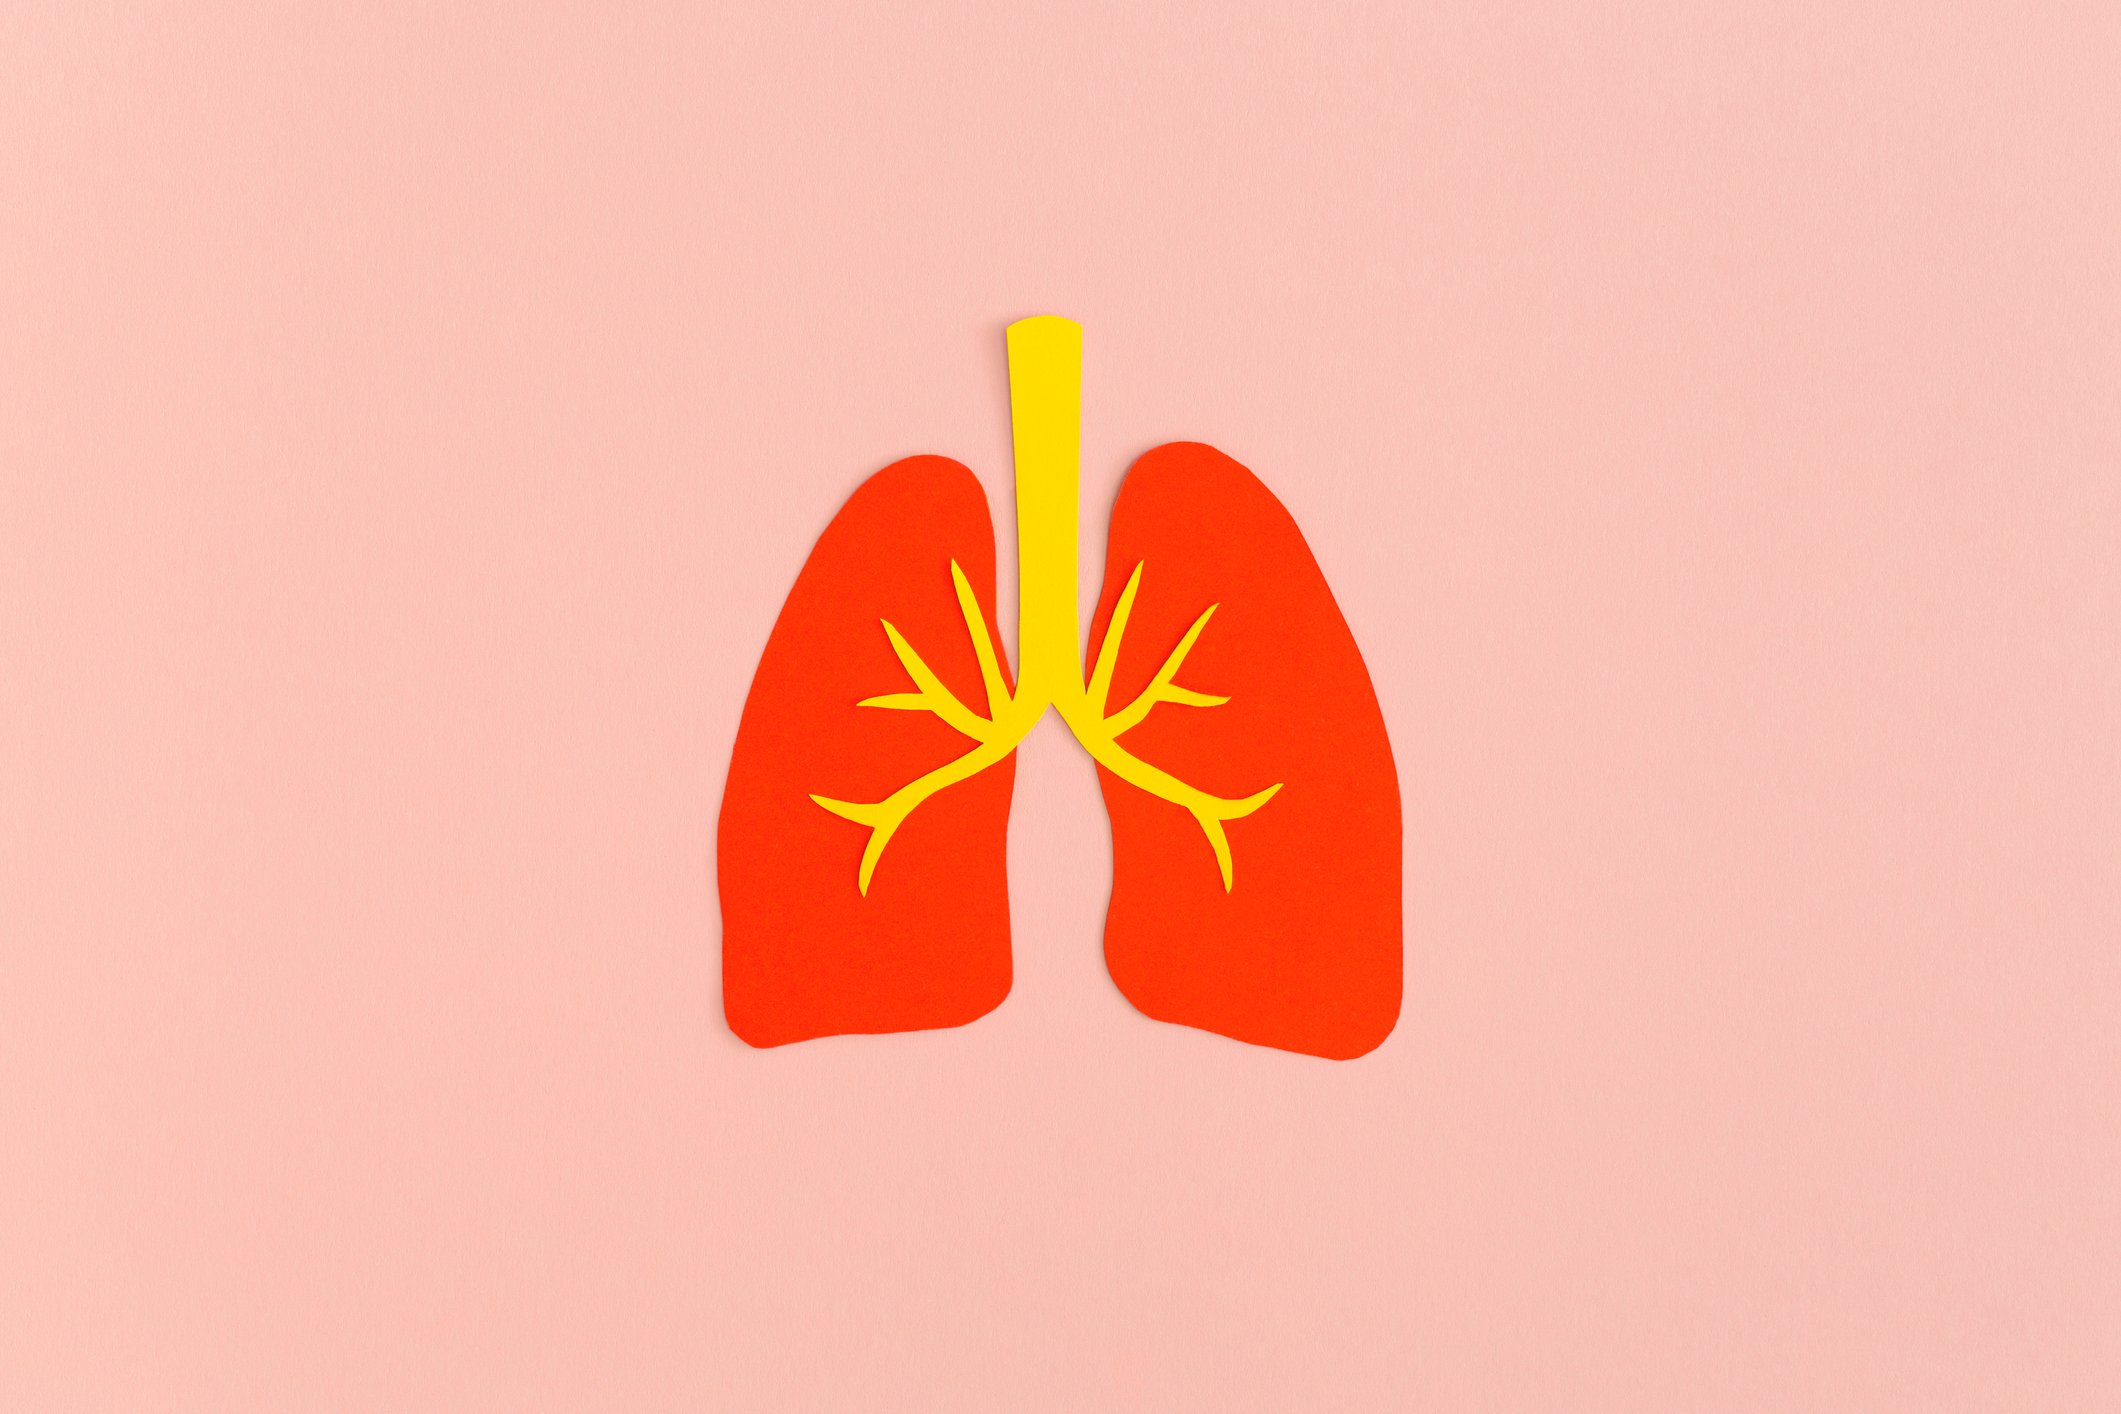 Taking on pharma giants, Endeavor links IPF drug to improved lung function in phase 2